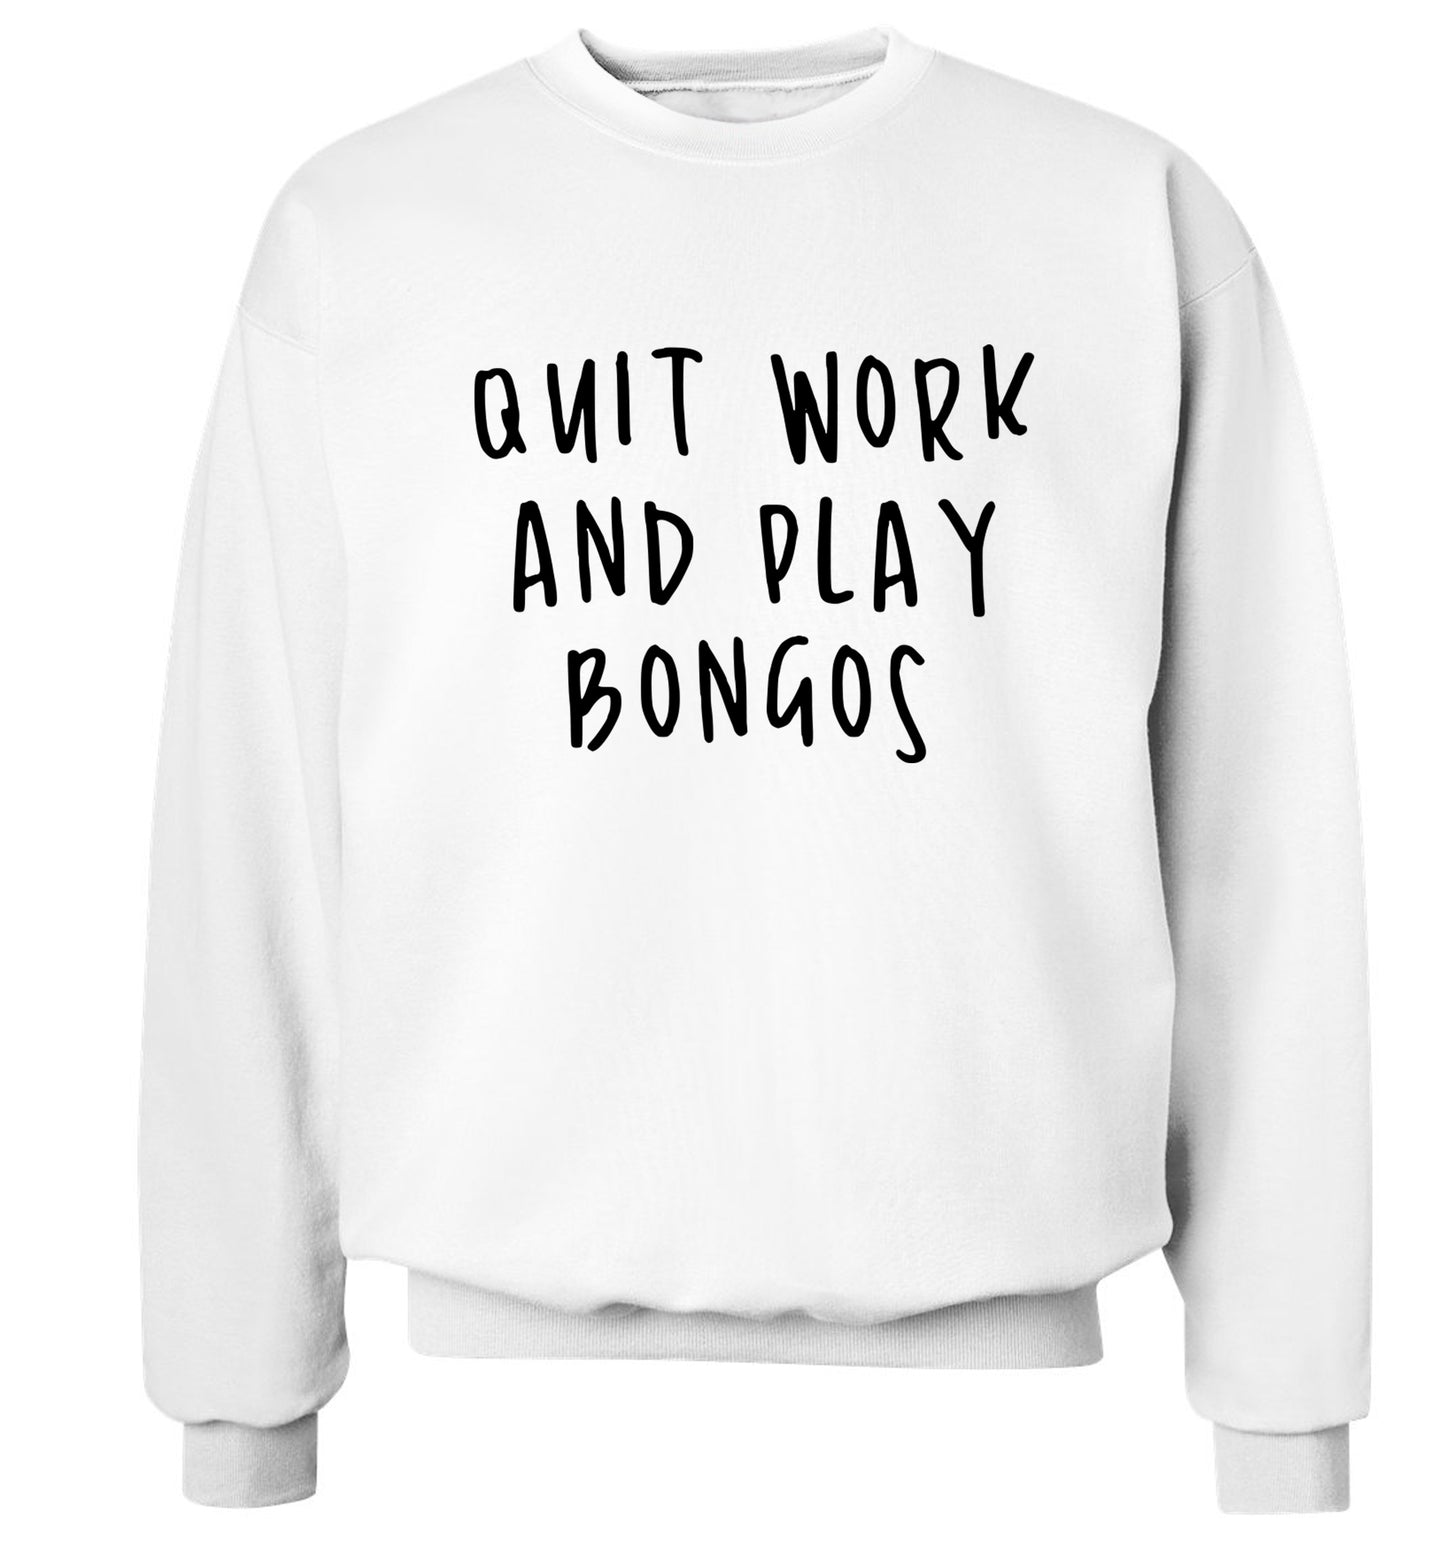 Quit work and play bongos Adult's unisex white Sweater 2XL